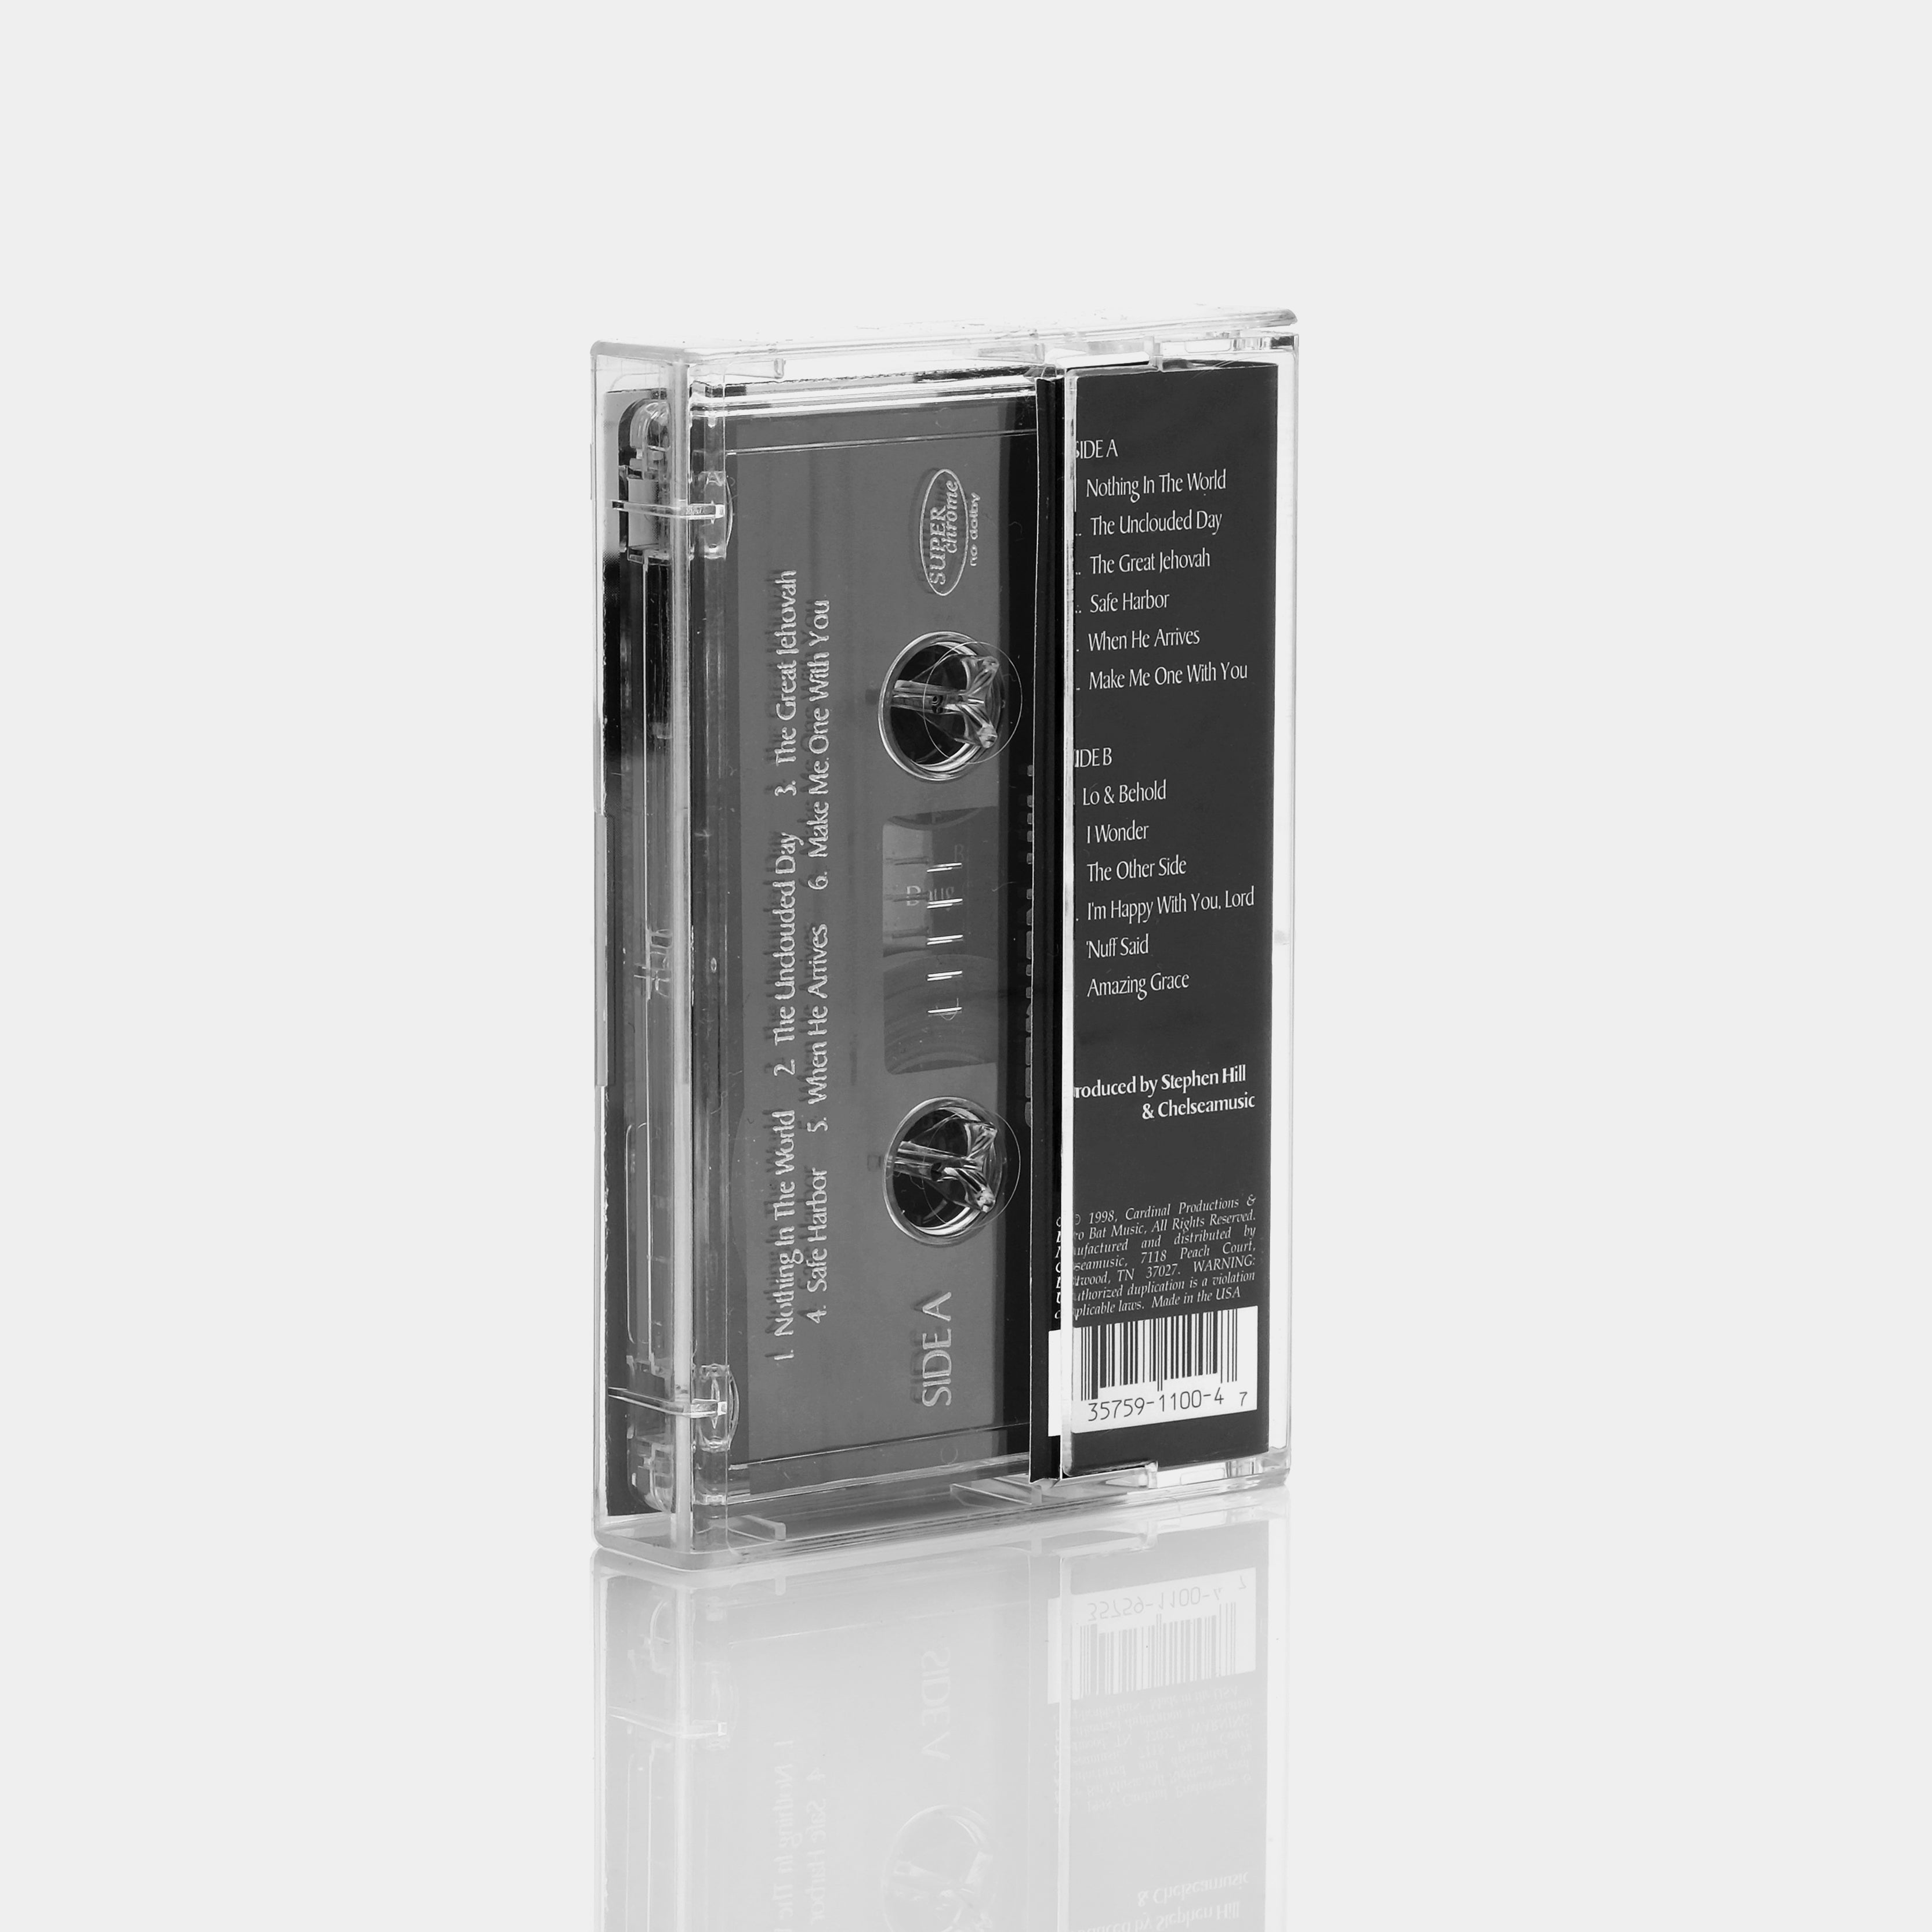 Stephen Hill - Nothing In The World Cassette Tape